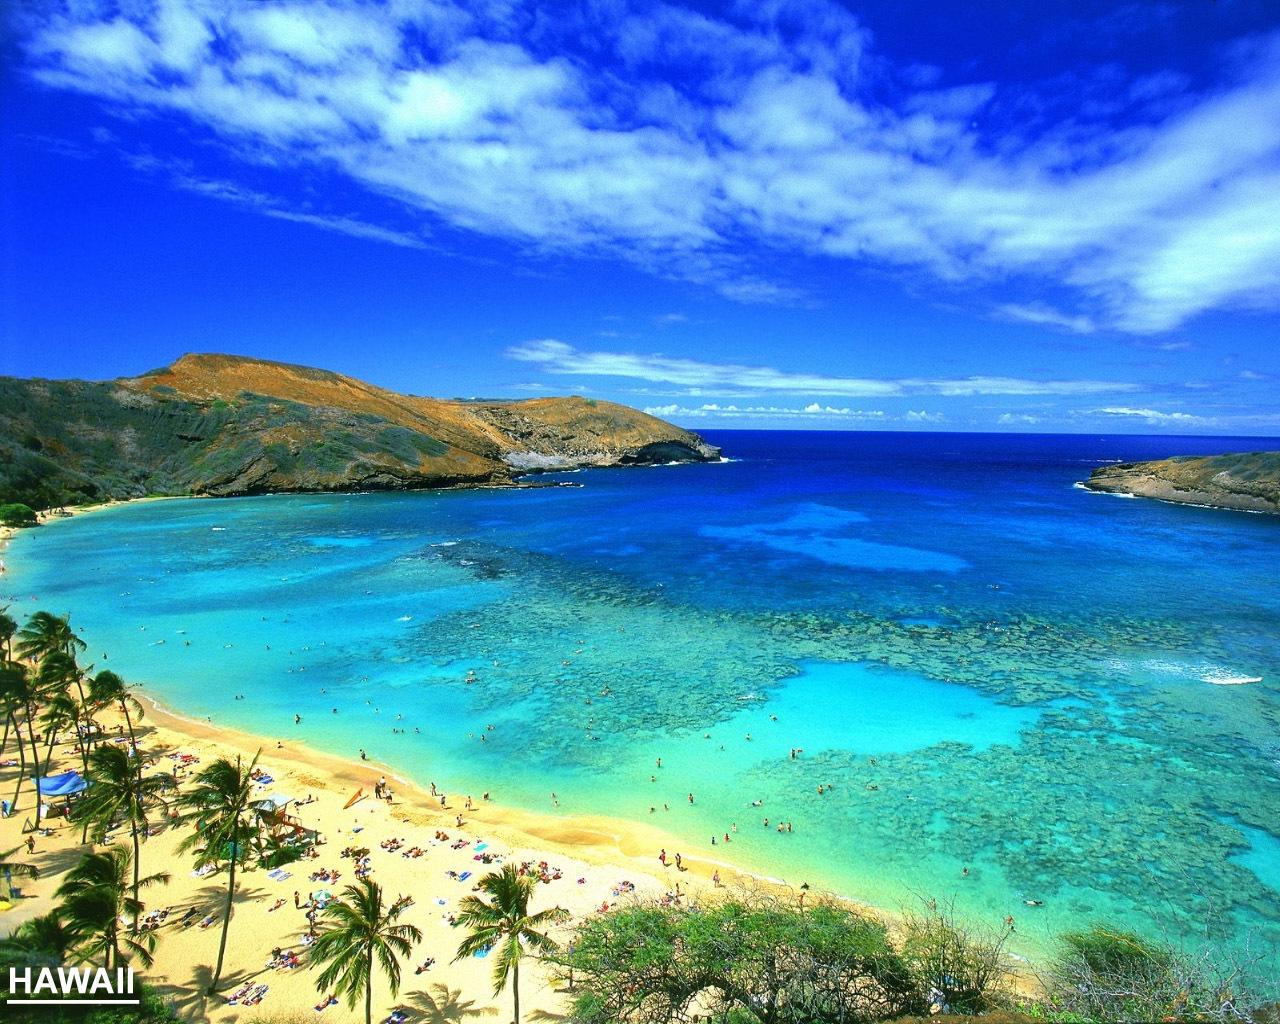 Hawaii Wallpaper Free HD Background Image Picture